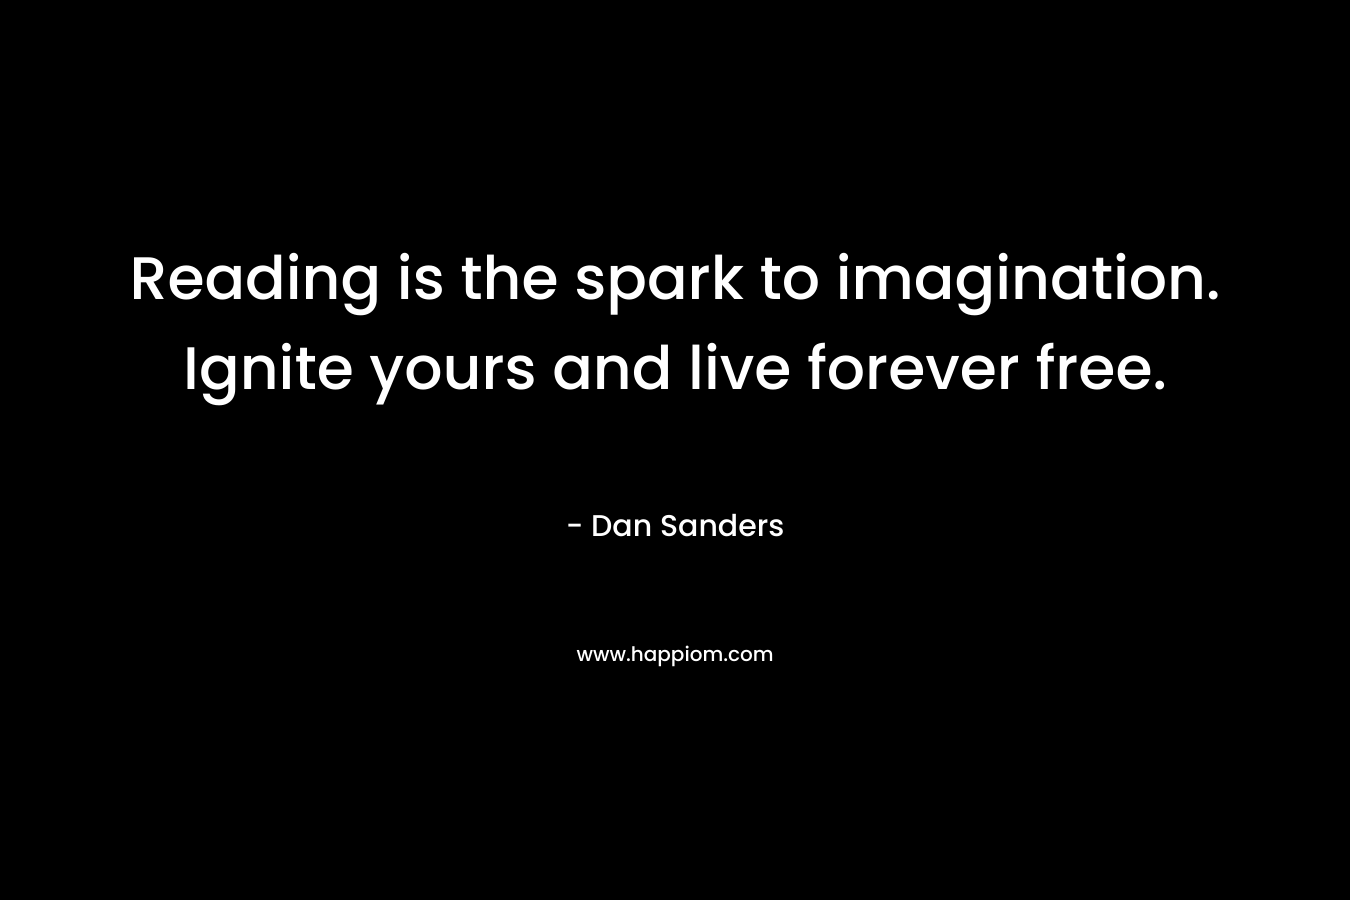 Reading is the spark to imagination. Ignite yours and live forever free. – Dan Sanders